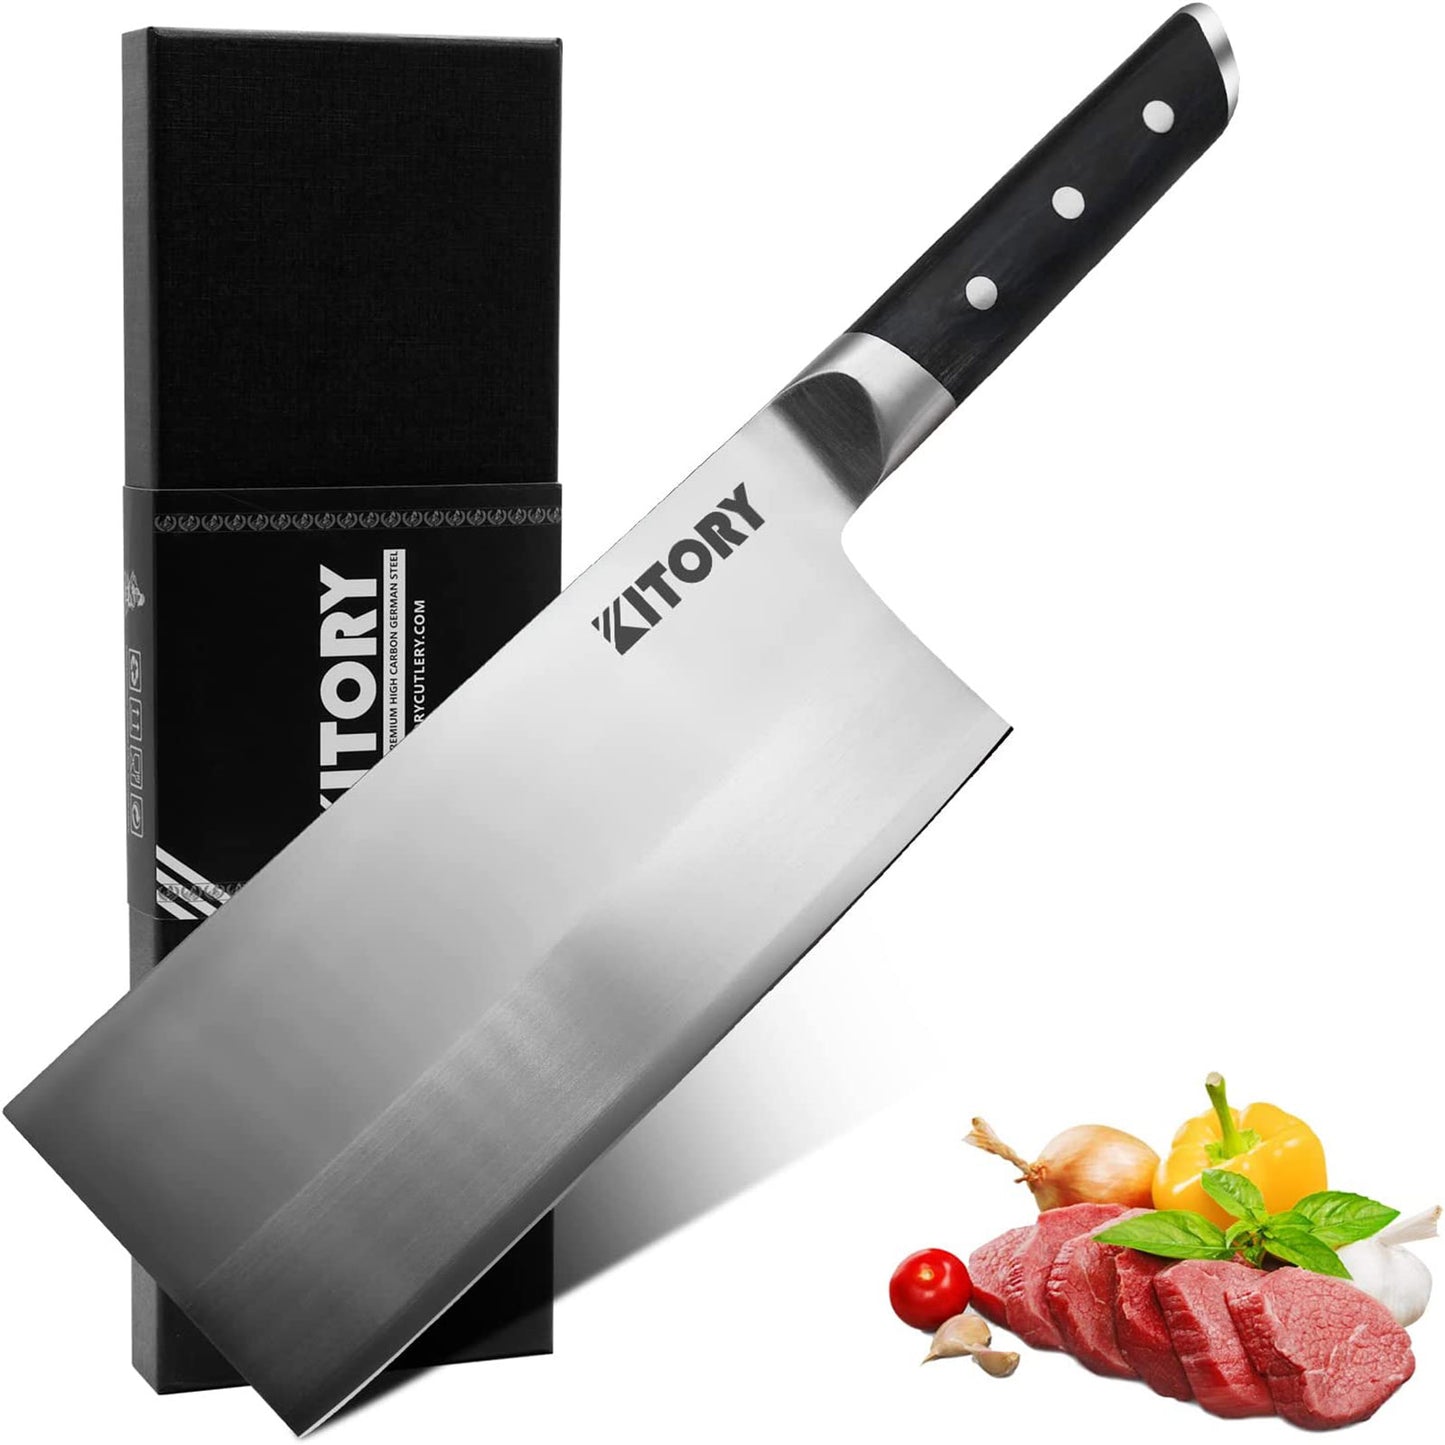 LOUISAX Vegetable Meat Cleaver Knife - 8” - Pro Chinese Cleaver Knife -  Butcher Knife - Forged High Carbon Steel - Full Tang - Ergonomic Pakkawood